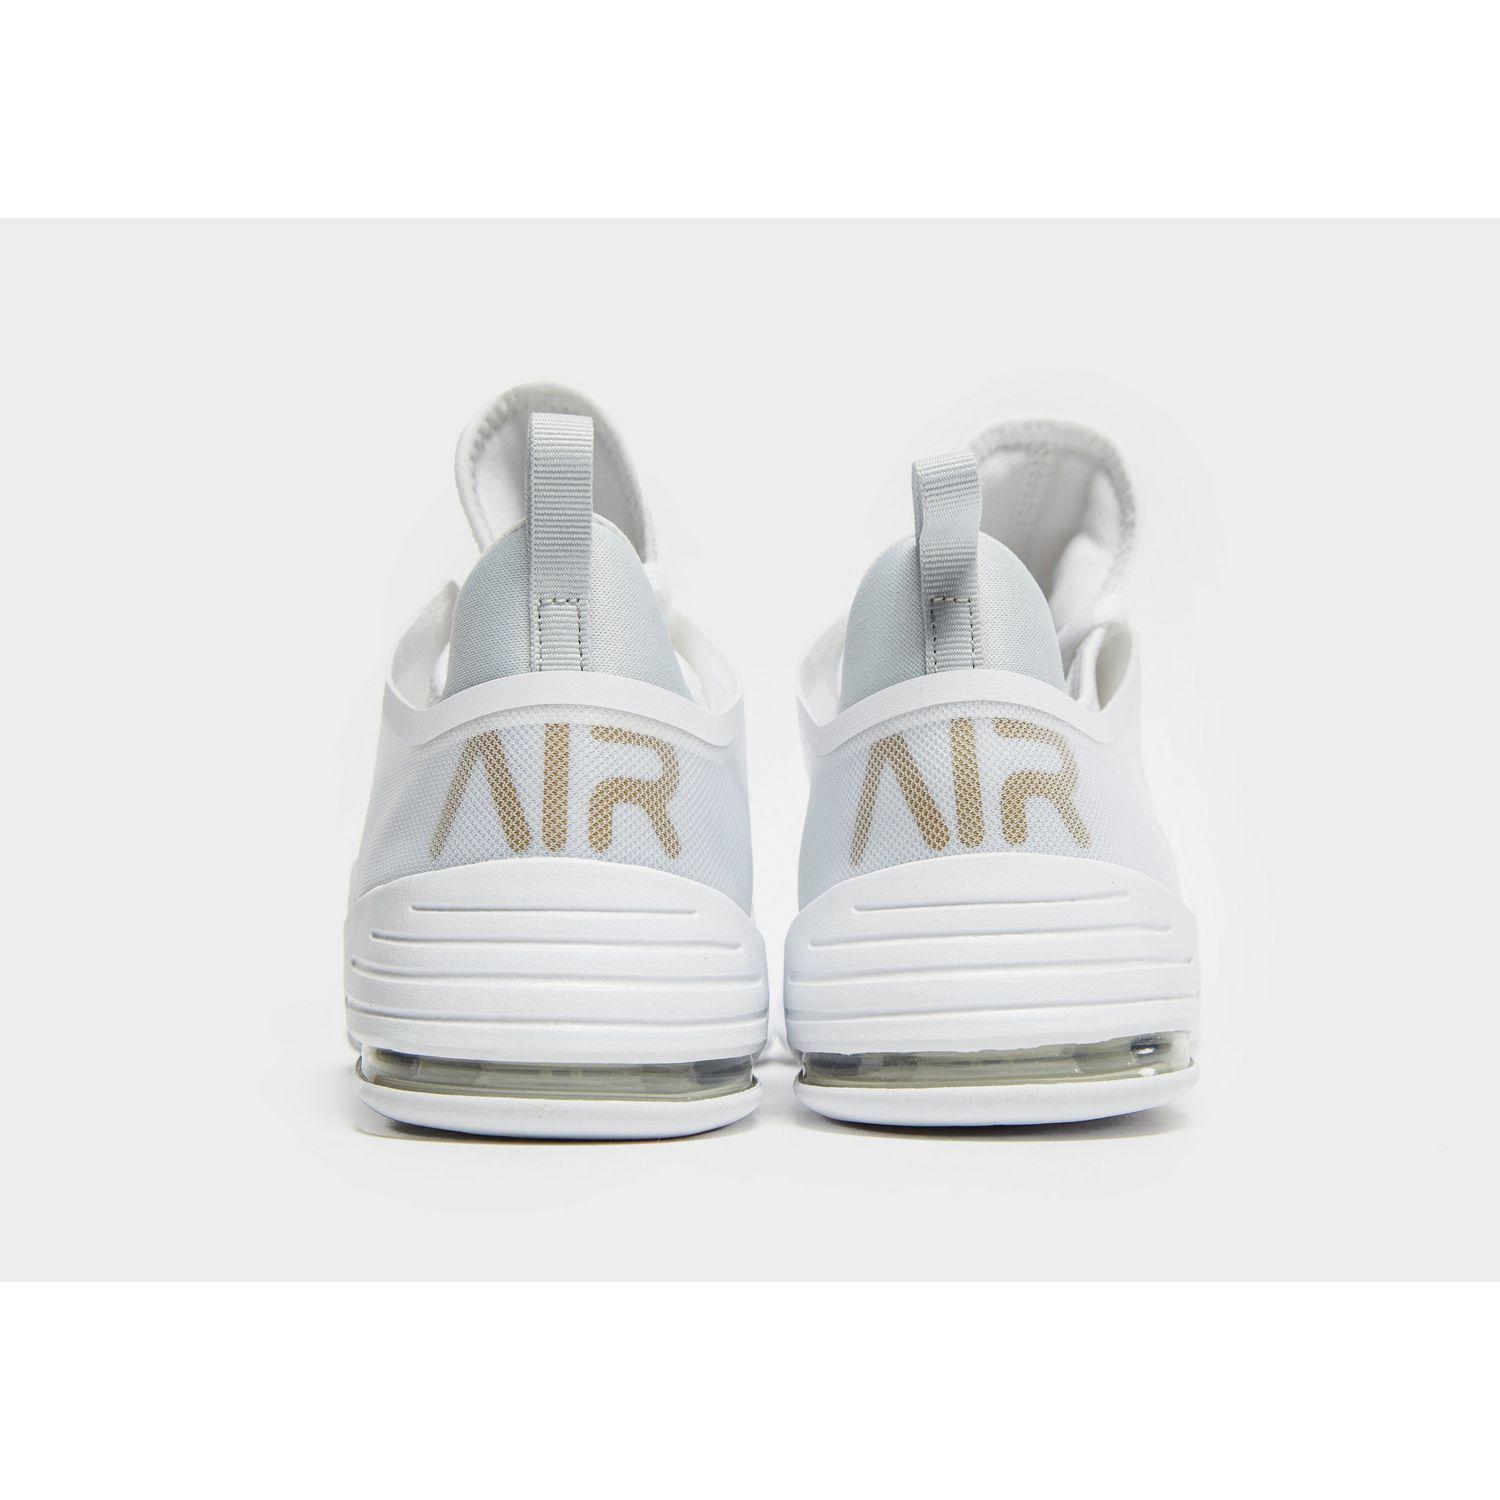 nike air max bella tr 2 white and gold